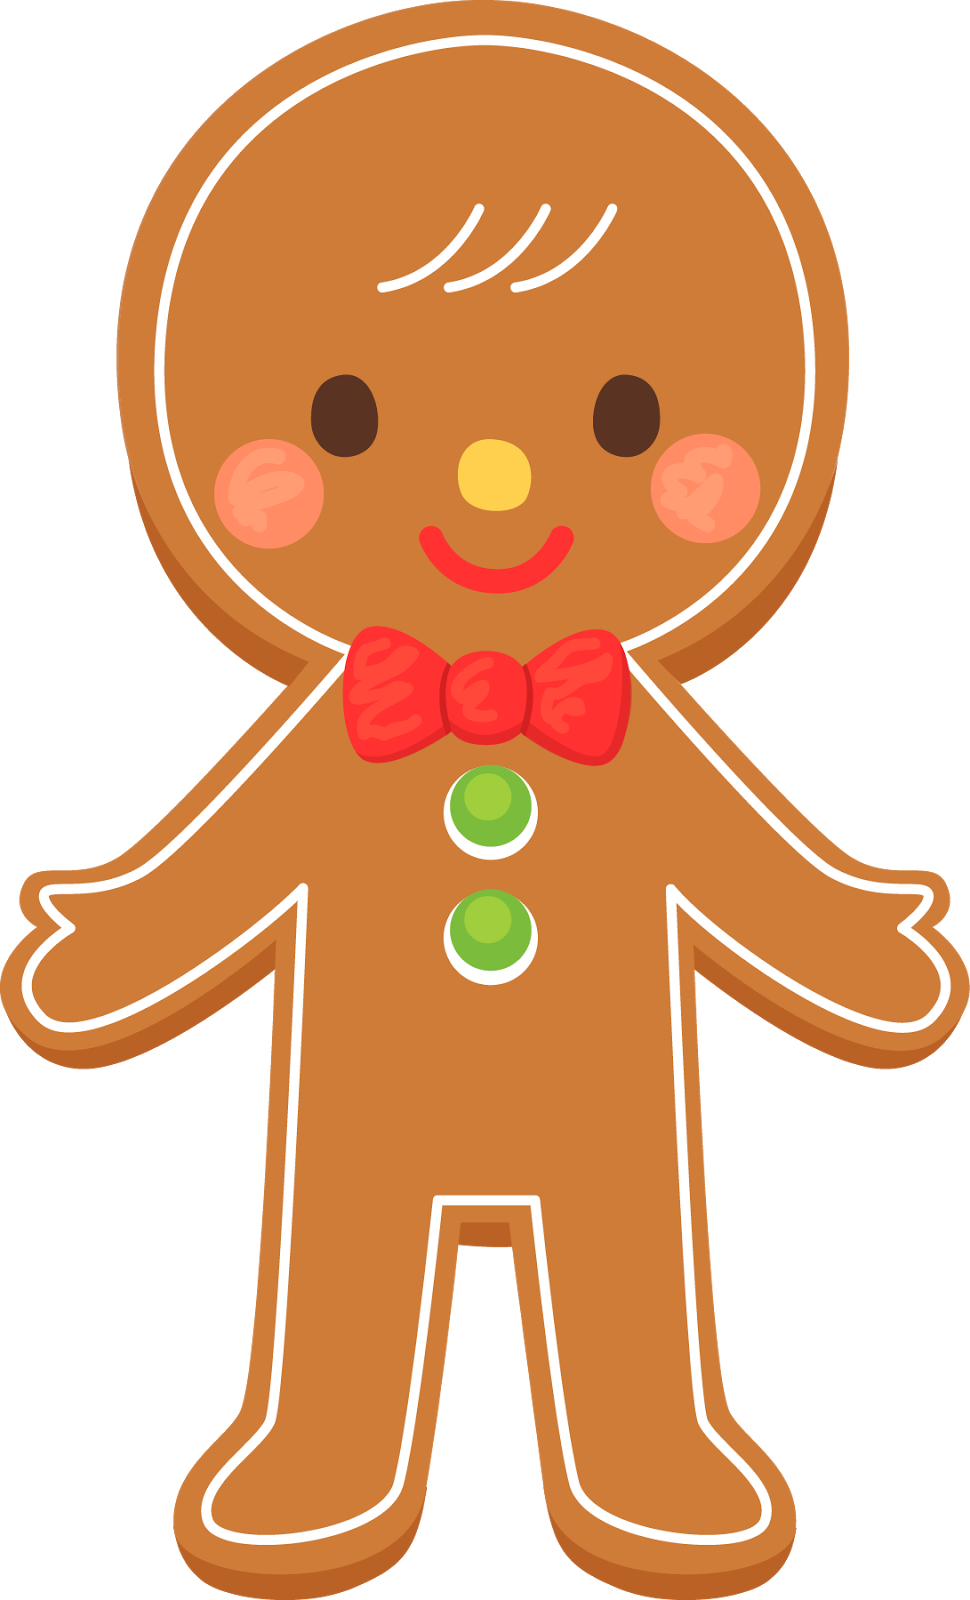 Clipart Of A Gingerbread Man Outline Cliparts.co